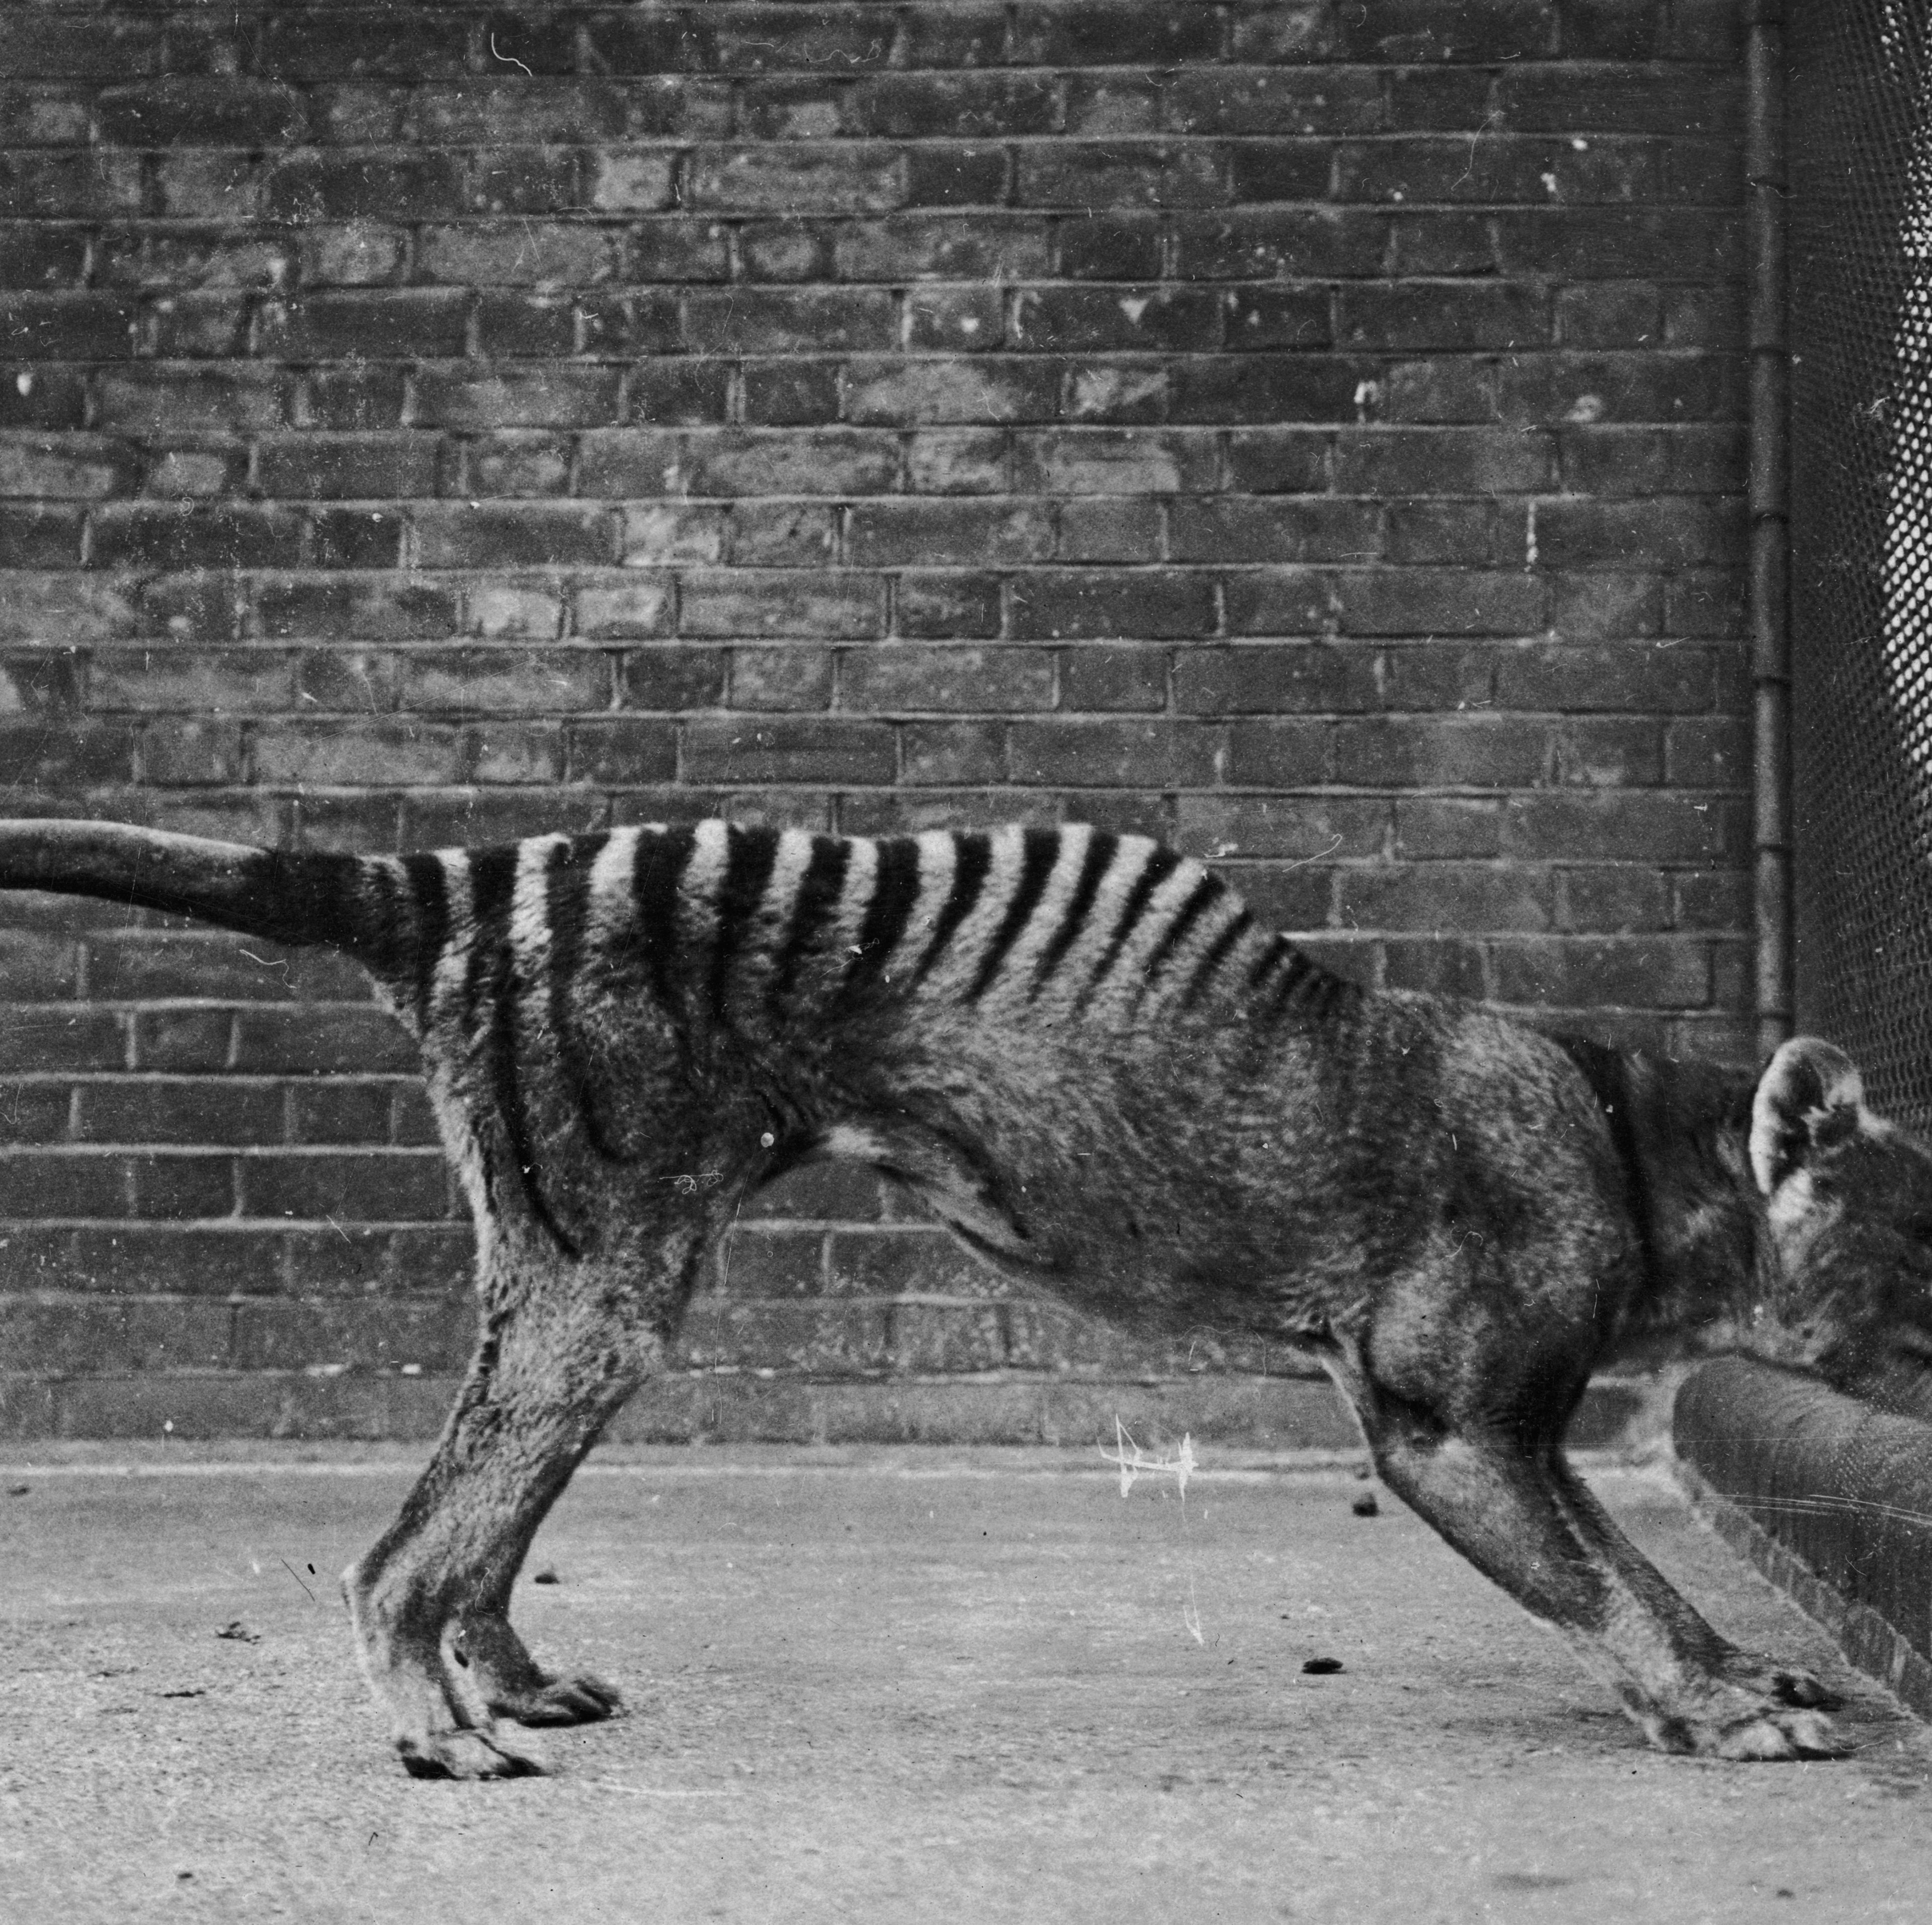 Scientists Are Hell-Bent on Resurrecting the Tasmanian Tiger. Here's Their Complicated Plan